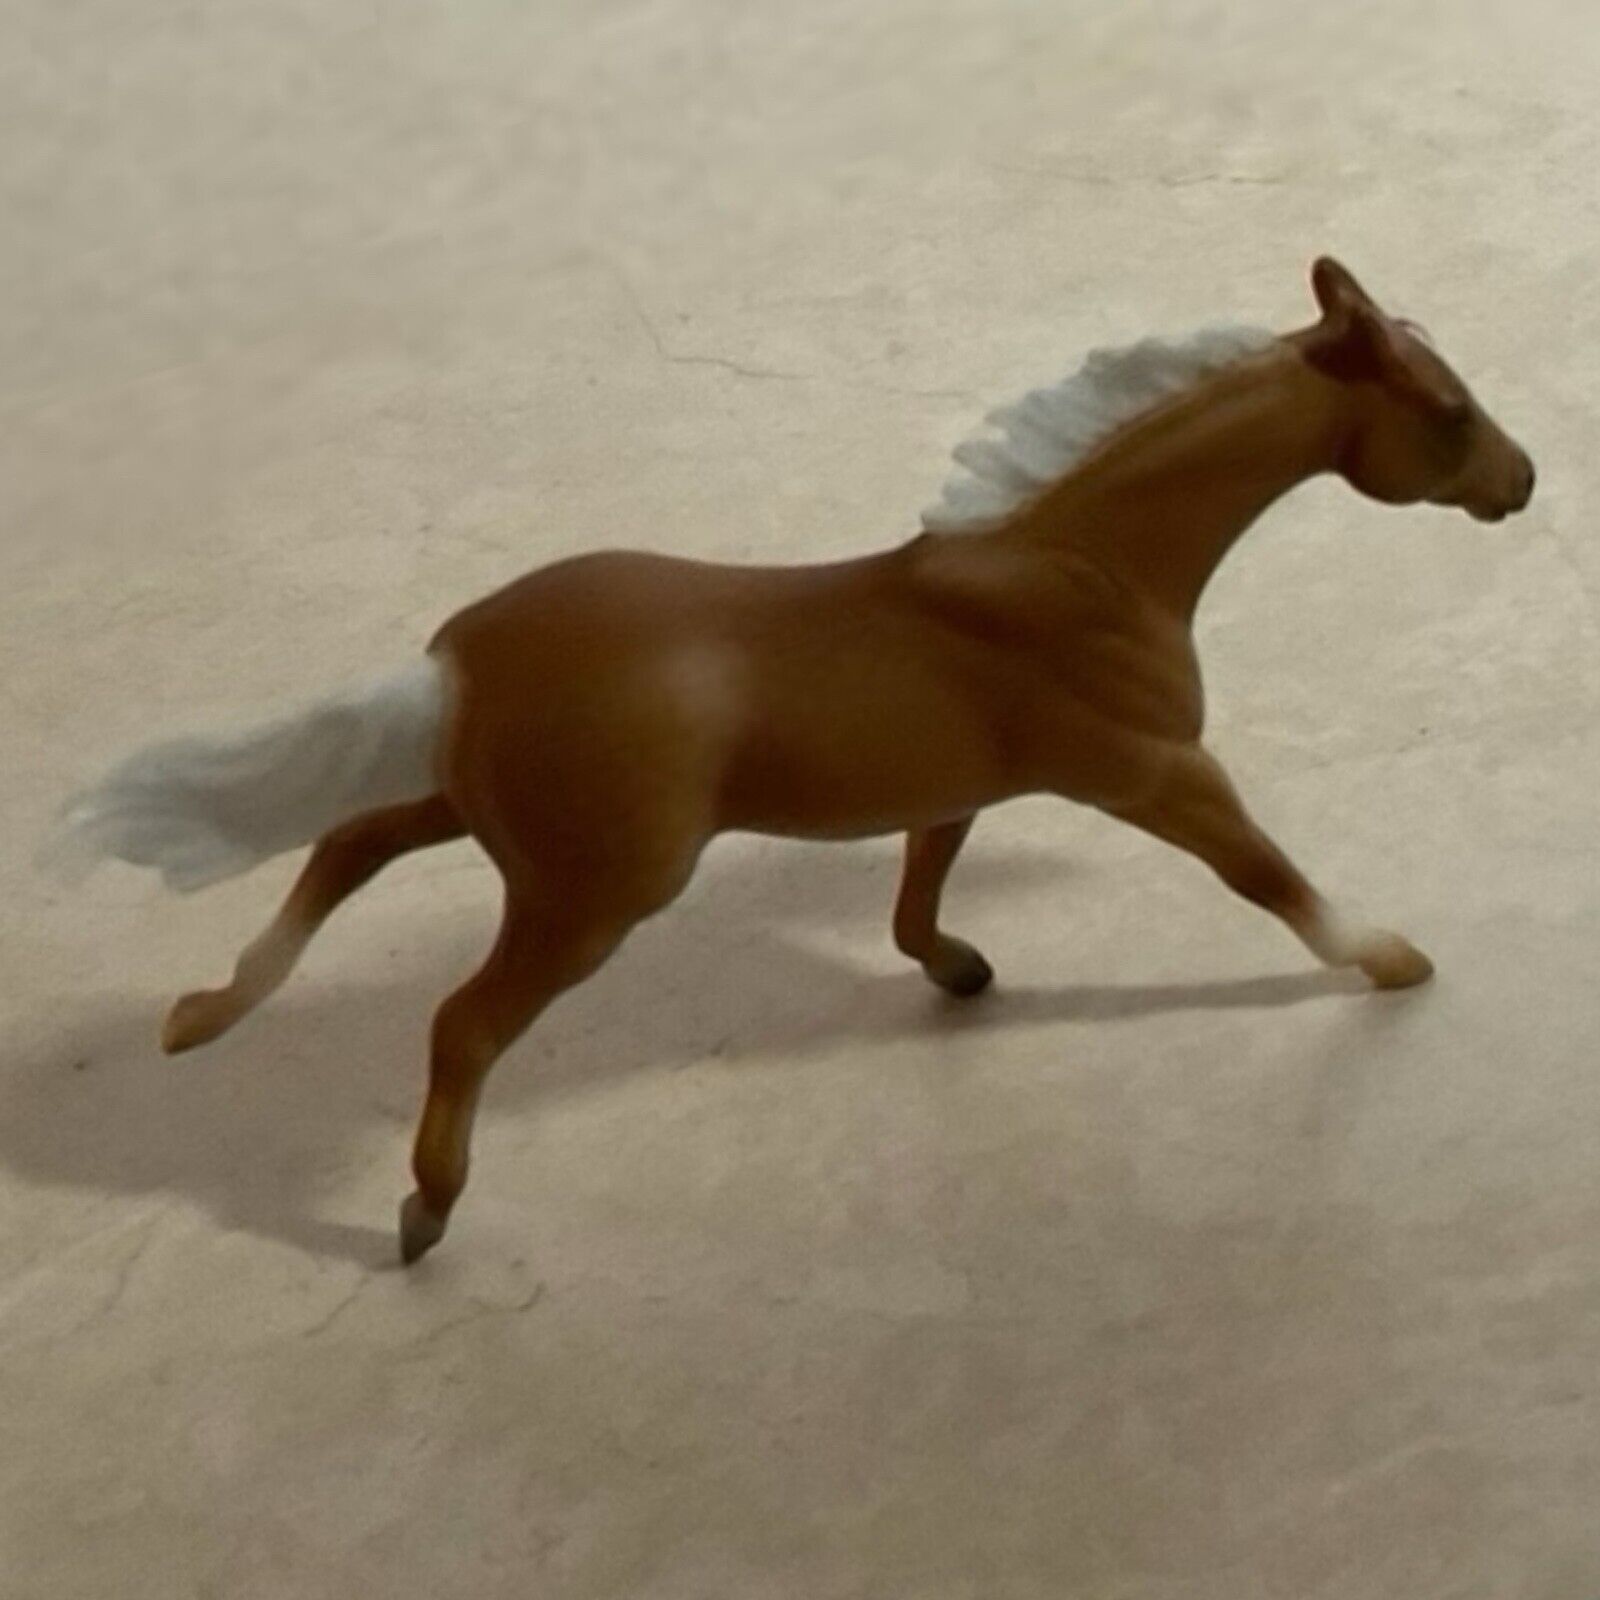 Breyer SM Stablemate 5388 Palomino Thoroughbred Competing at the Games ~ Retired